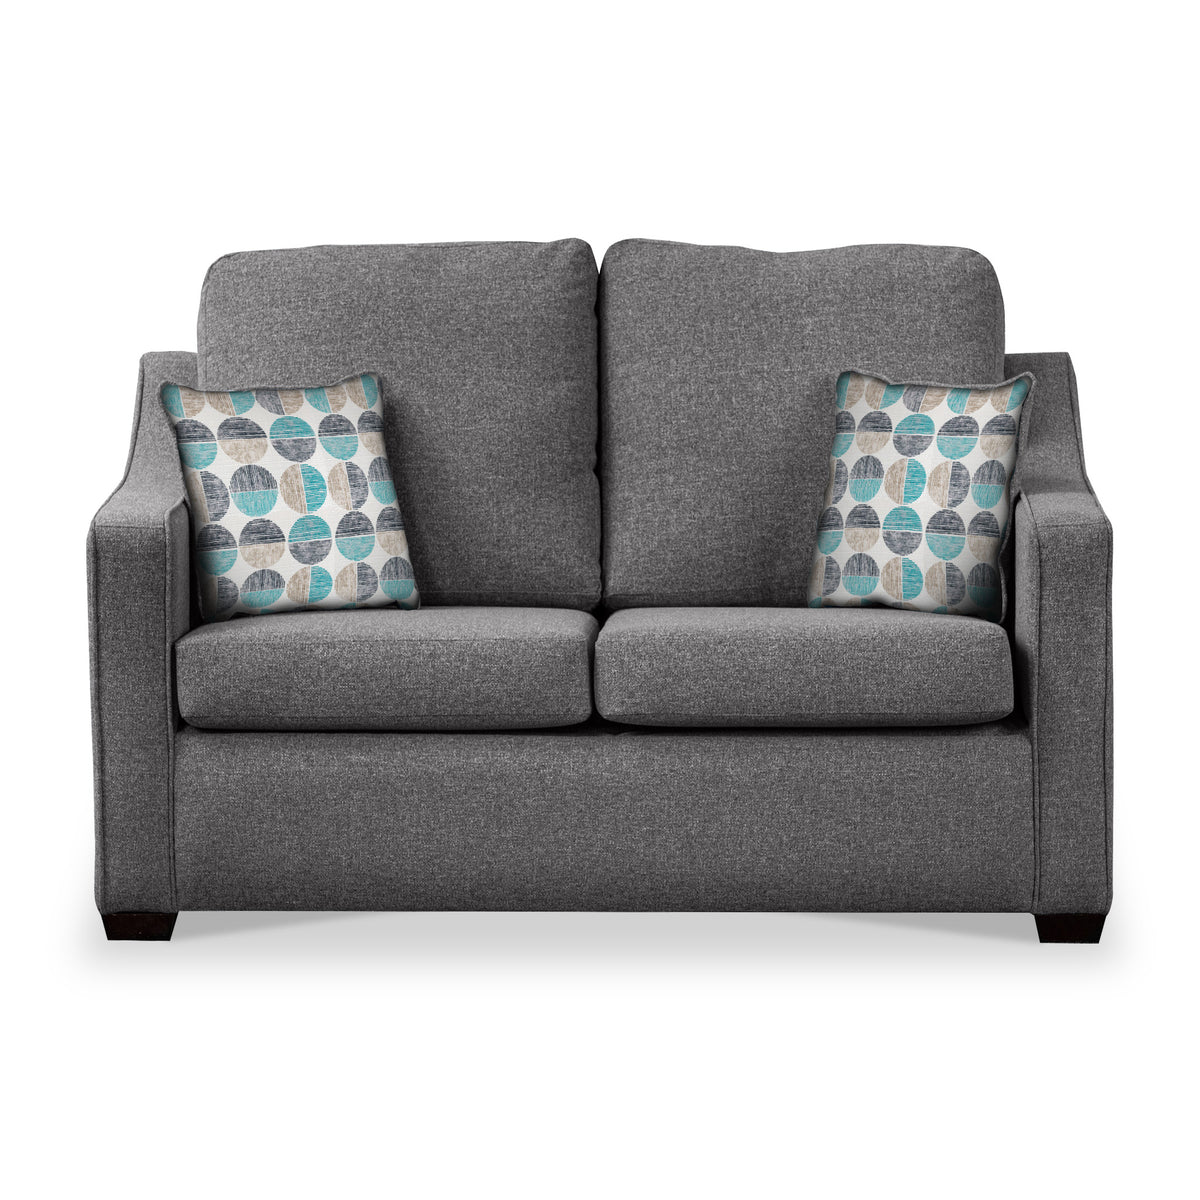 Fenton Charcoal Soft Weave 2 Seater Sofabed with Duck Egg Scatter Cushions from Roseland Furniture